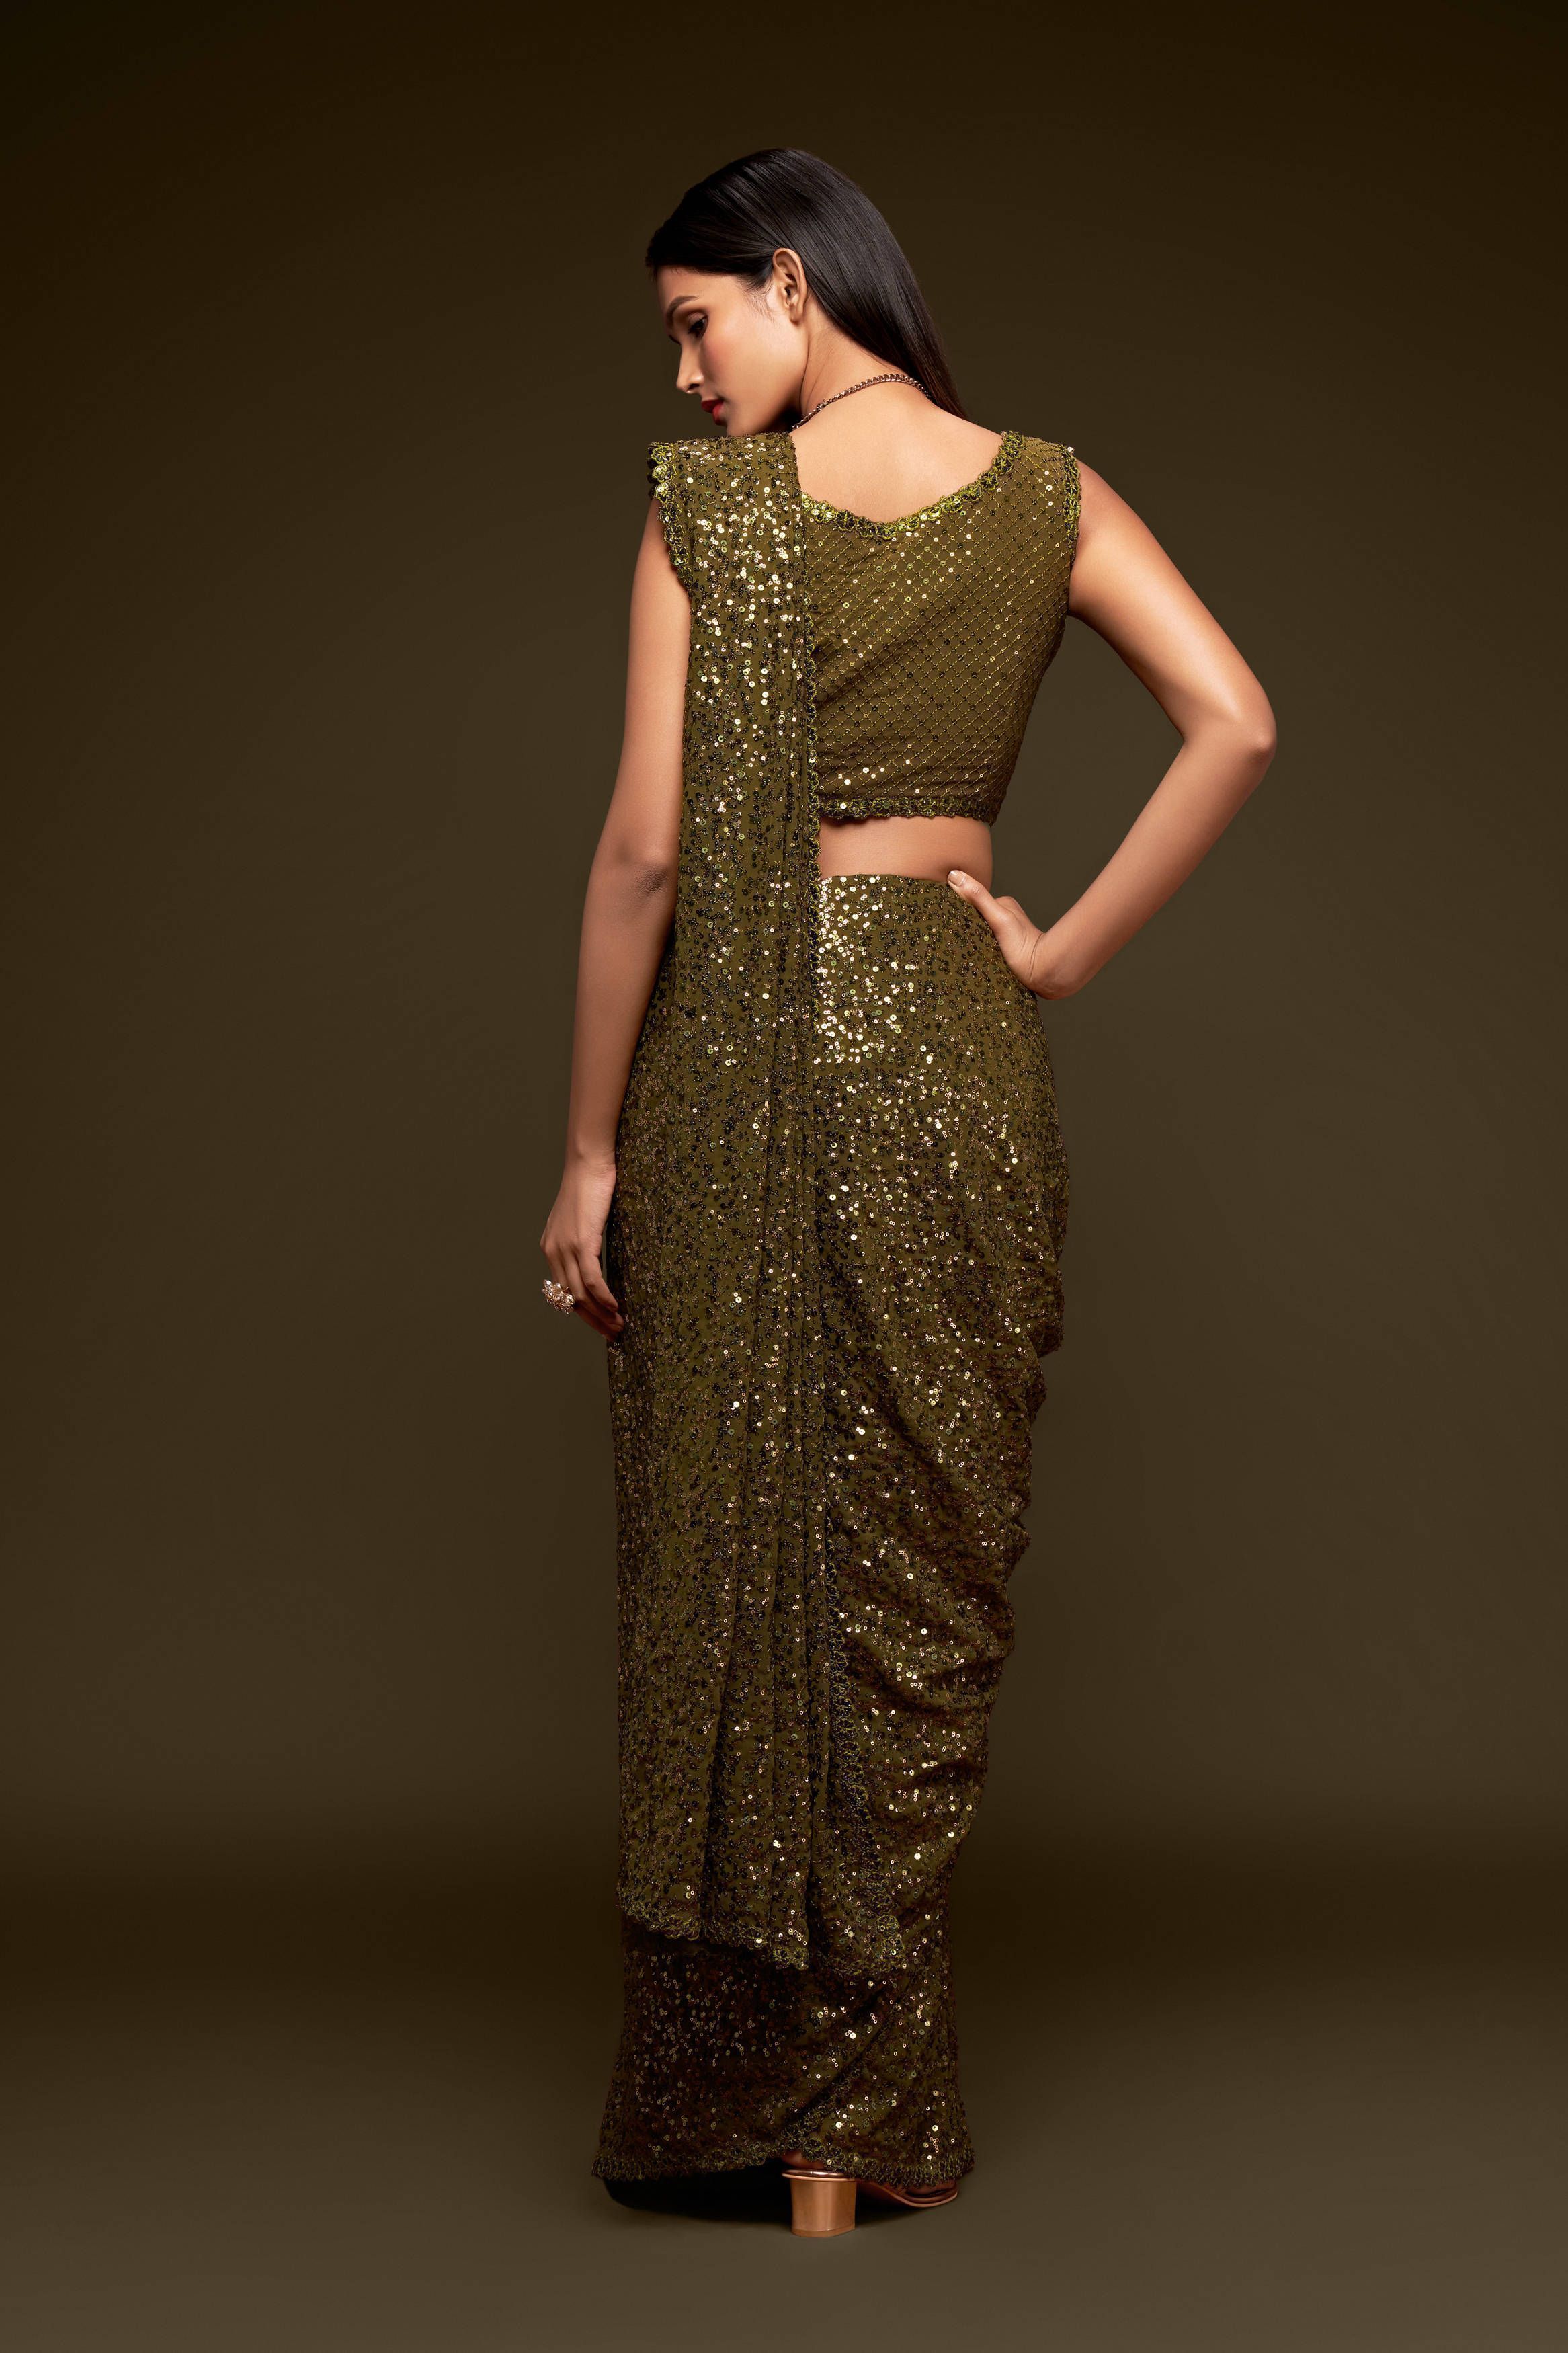 New Designer Sabyasachi Lehenga For Party Wear, Size: Free at Rs 2199 in  Surat